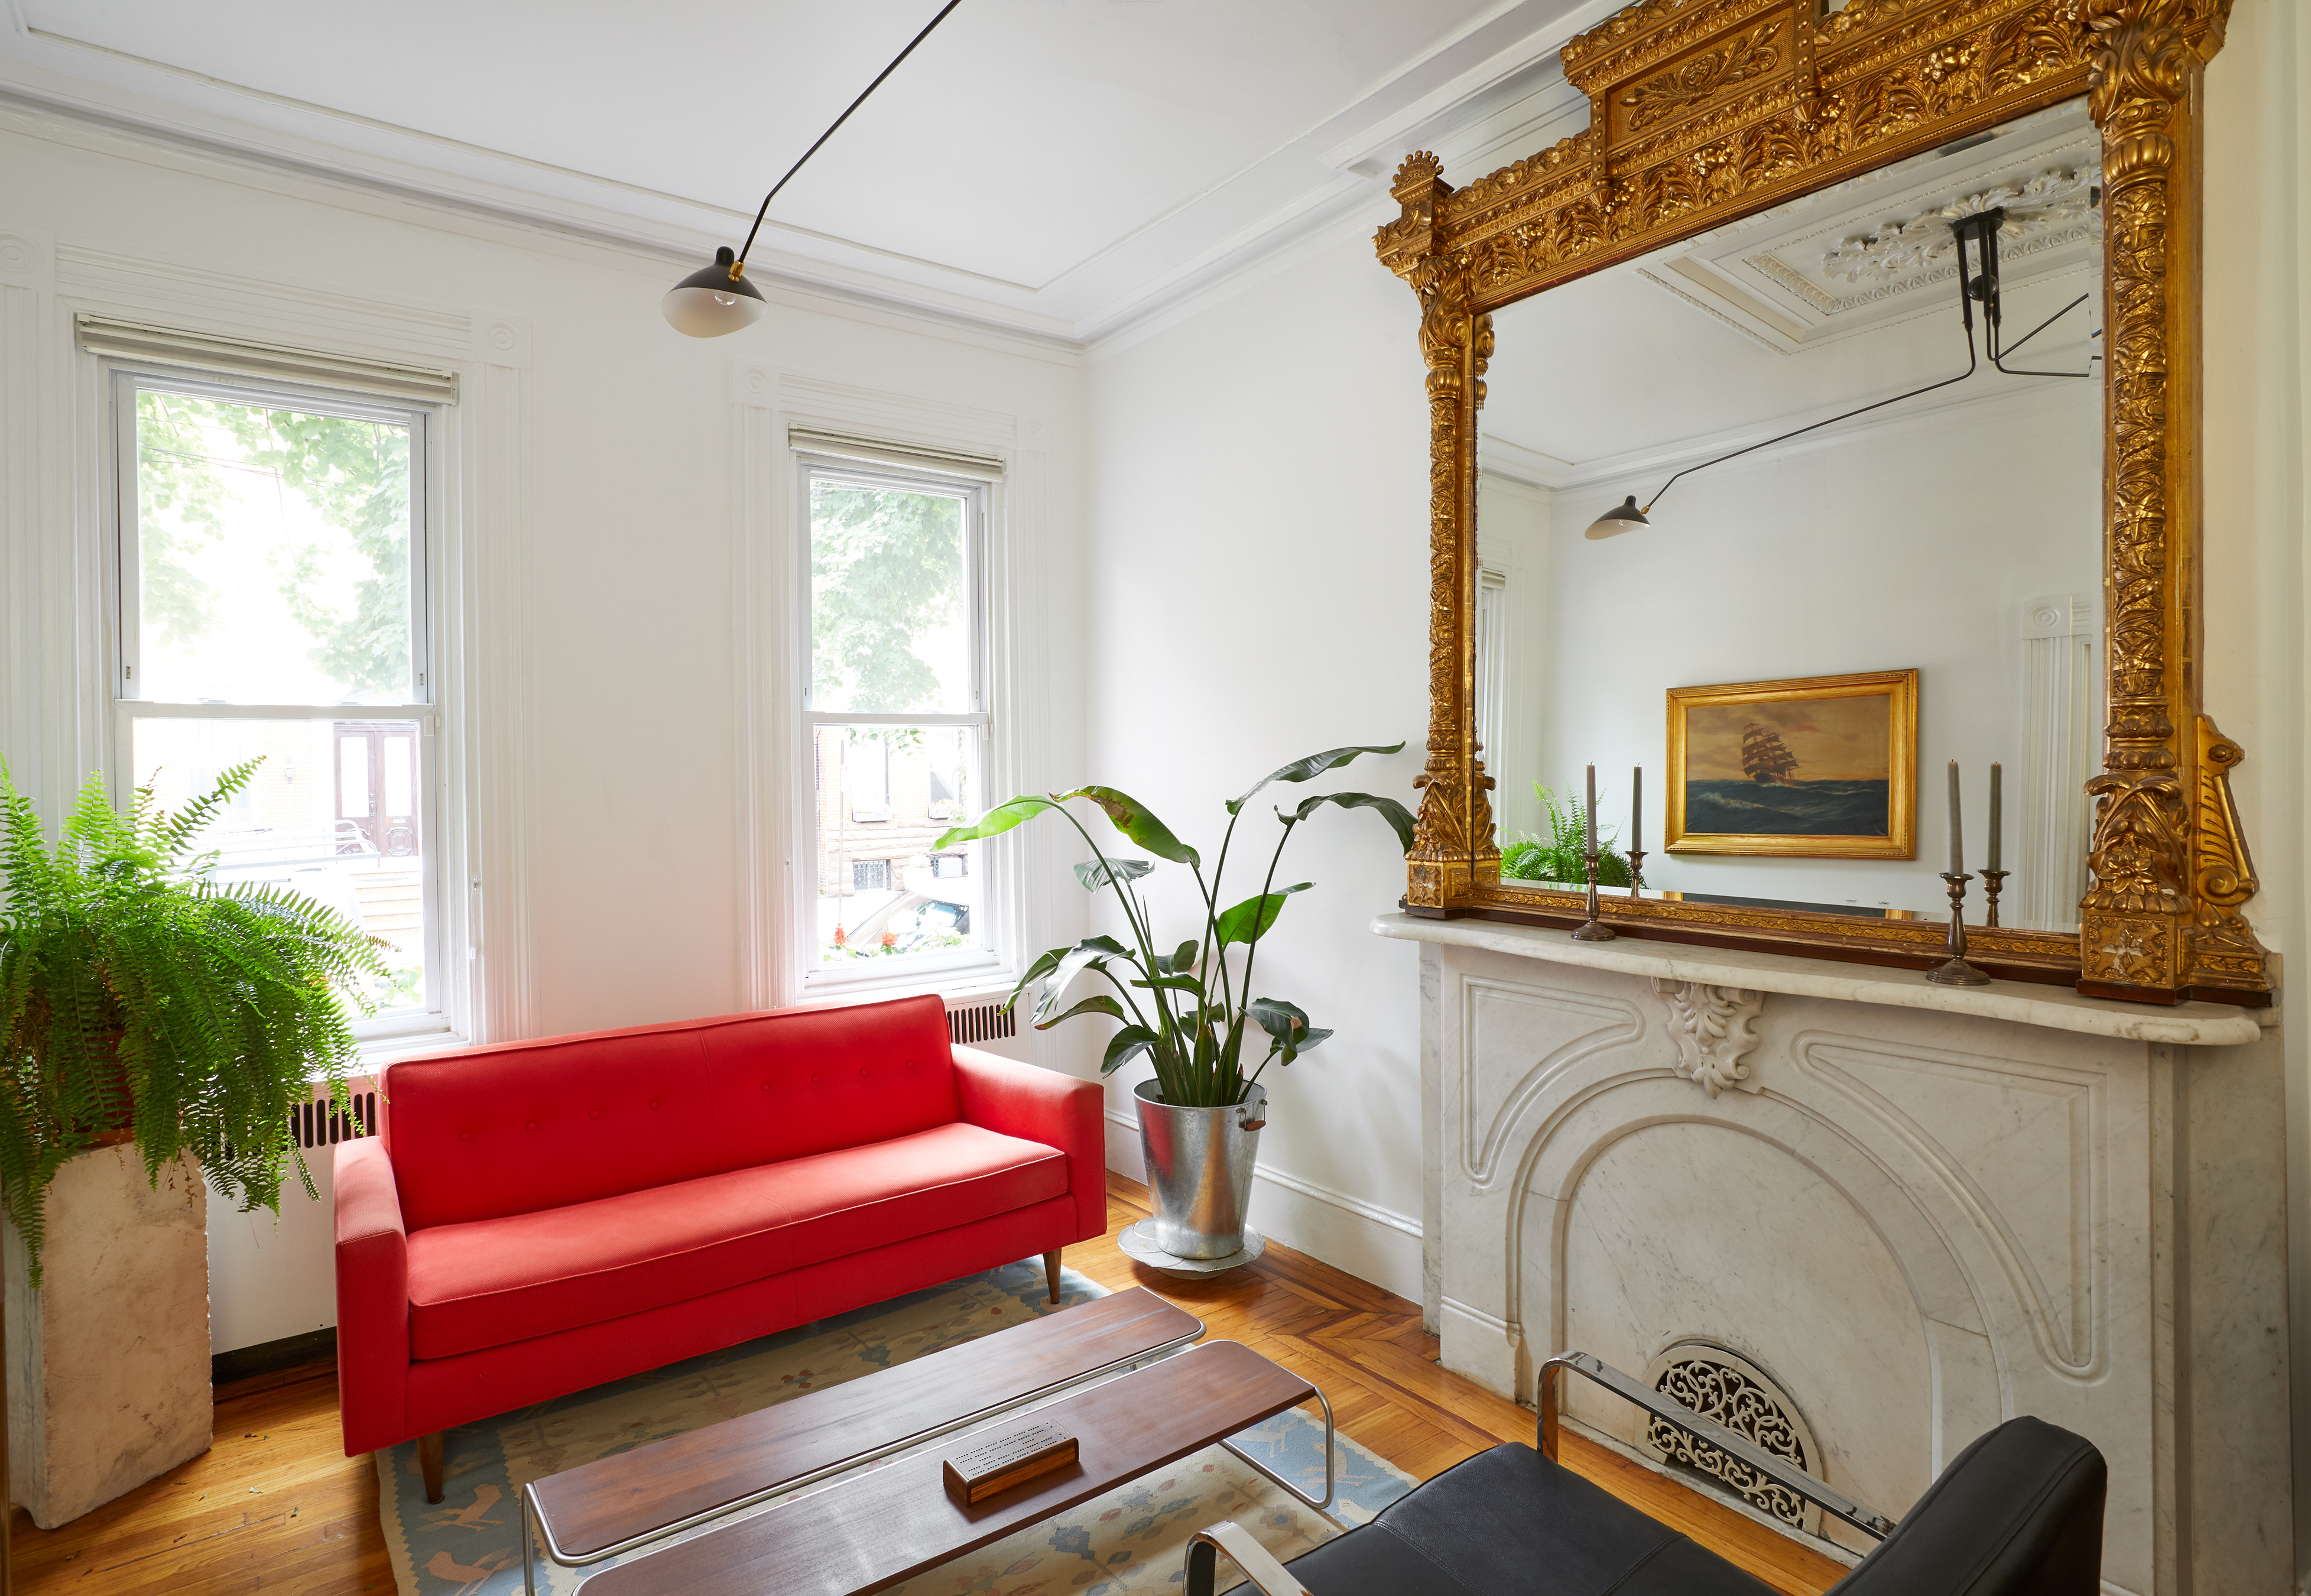 A living area. There is a bright red couch and a fireplace. Above the fireplace sits a large mirror with an ornamental brass frame. There are two windows letting in natural light. There are houseplants in planters on the floor and a wooden coffee table. 